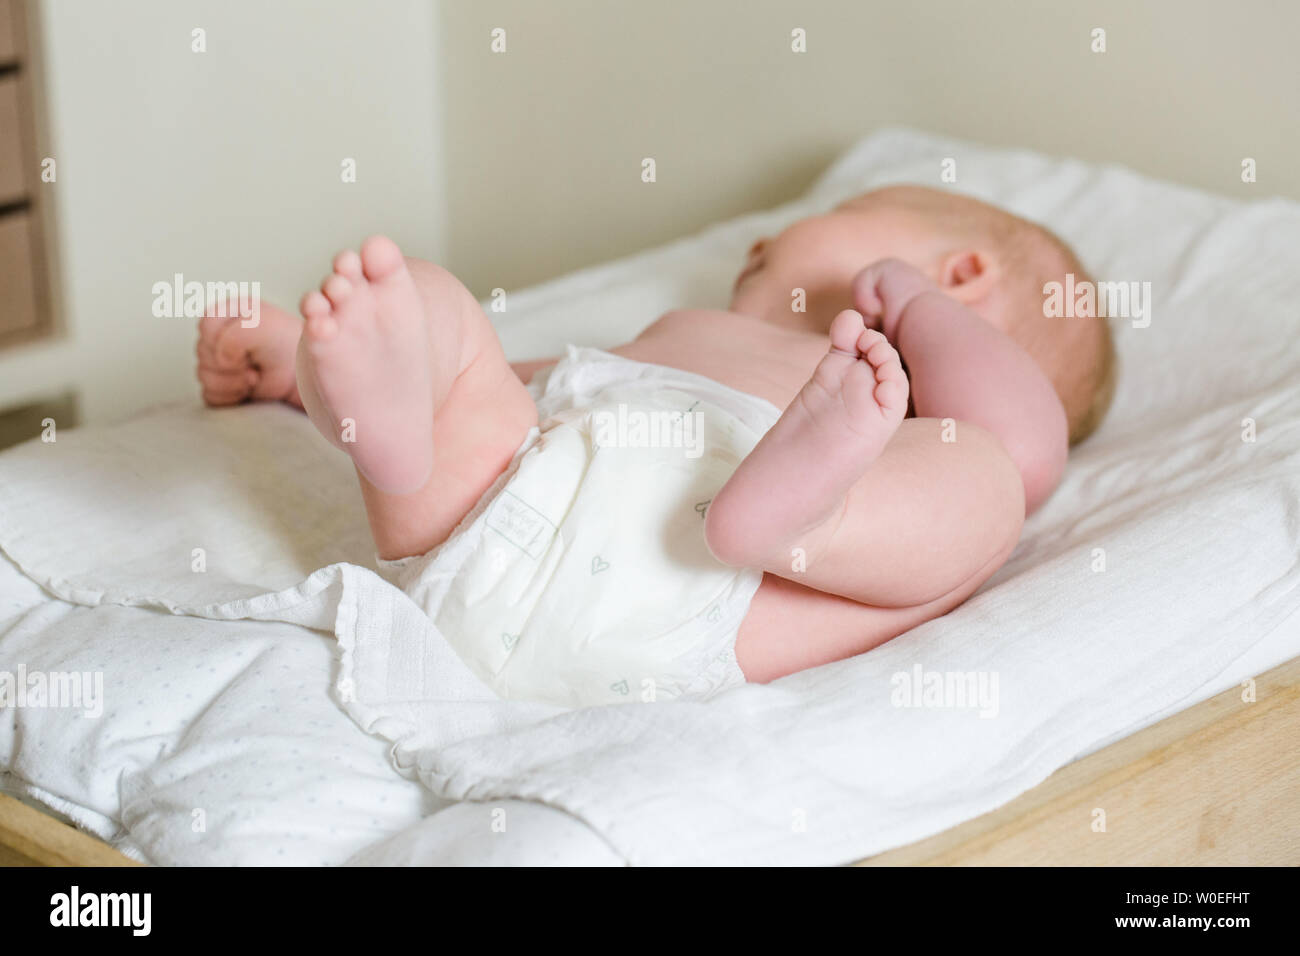 Infant 2 months lying on his back with his feet up on a changing table. Stock Photo